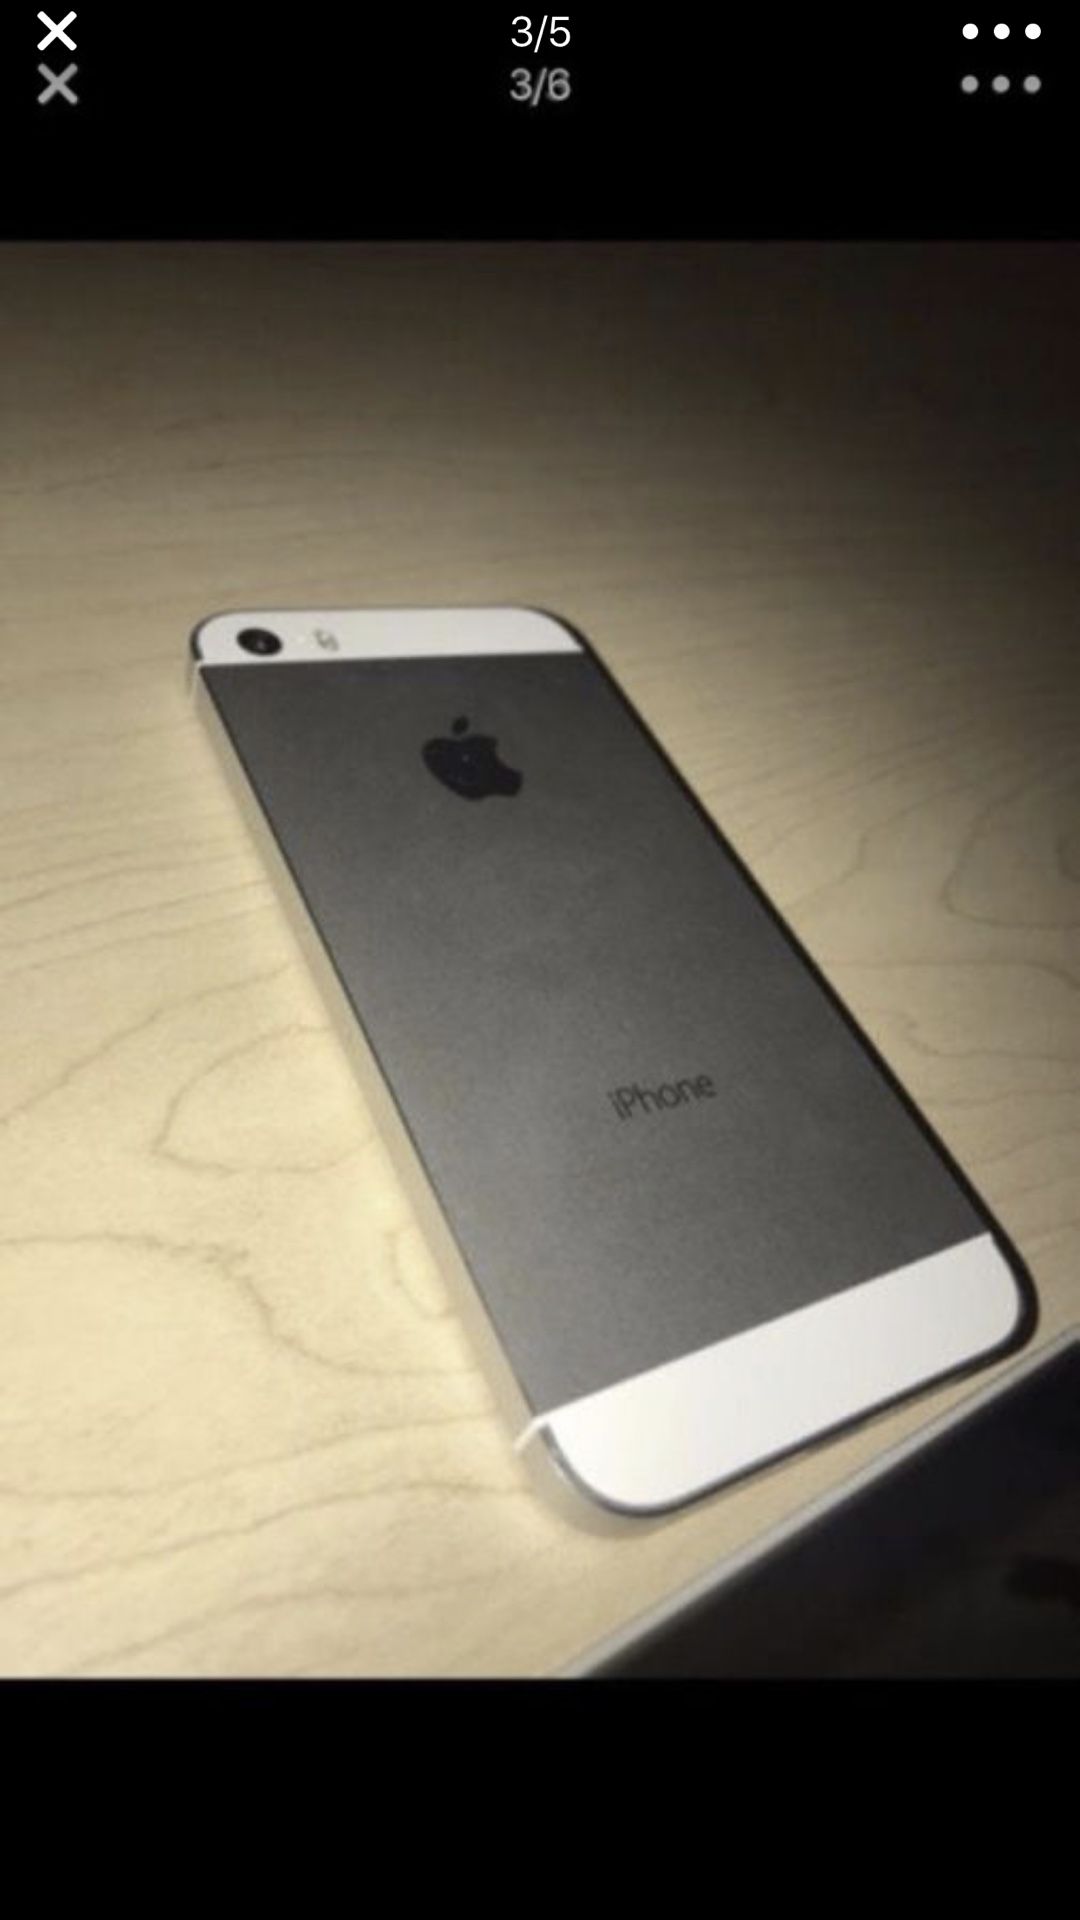 iPhone 5s unlocked ready to use nothing wrong with it